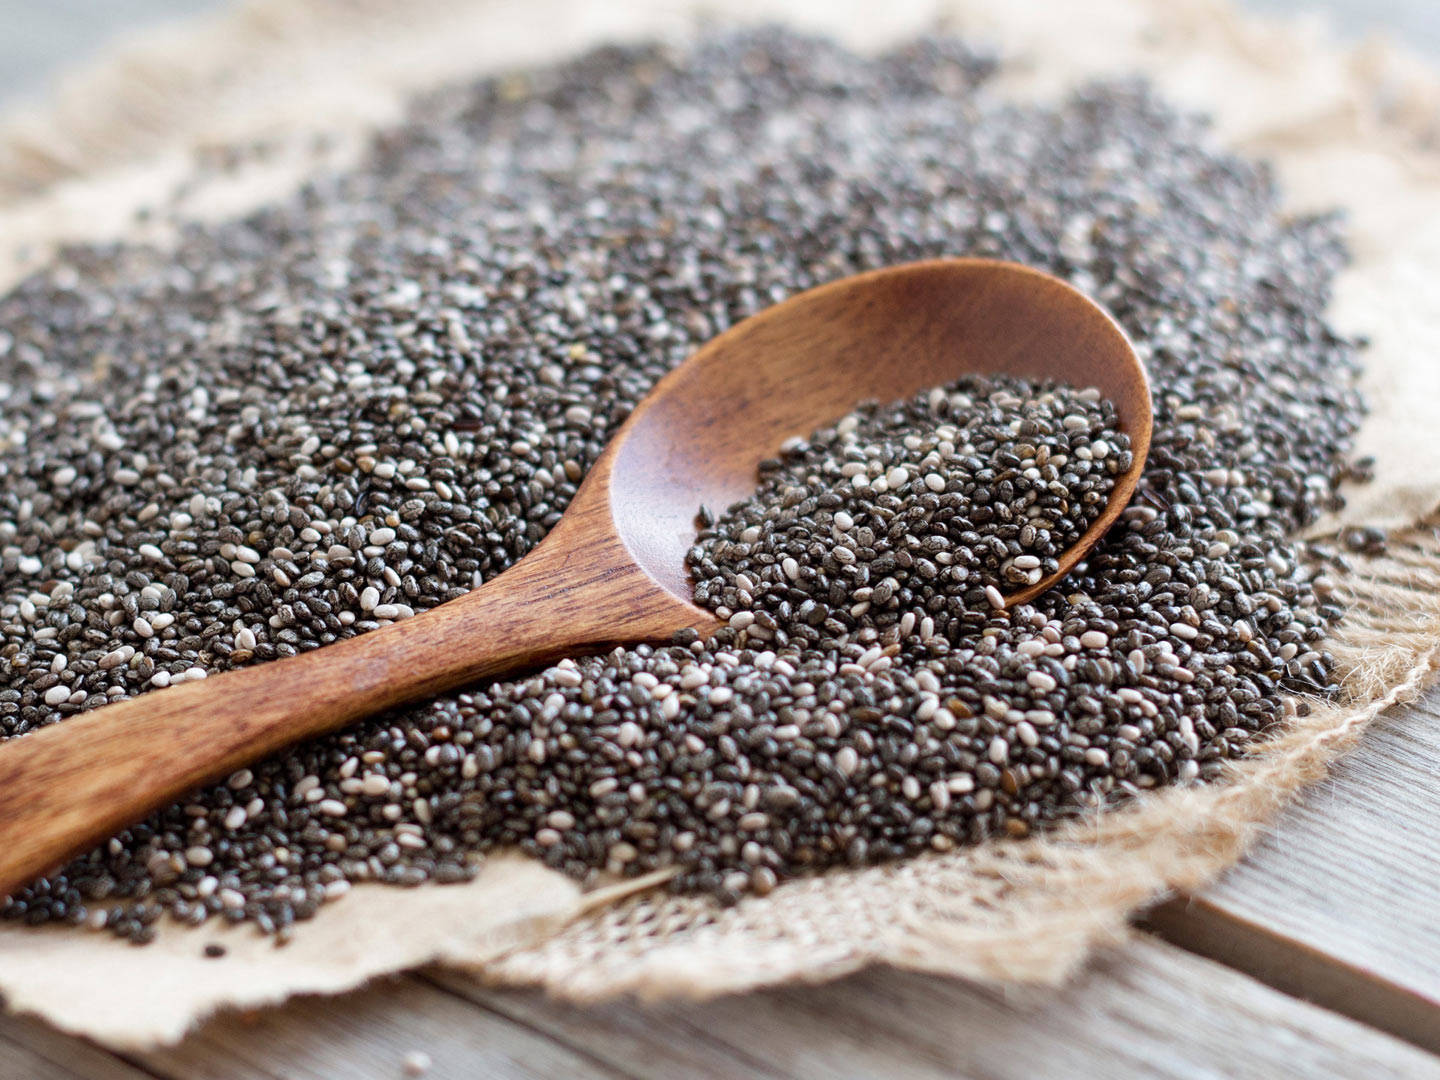 What Can You Make With Chia Seeds